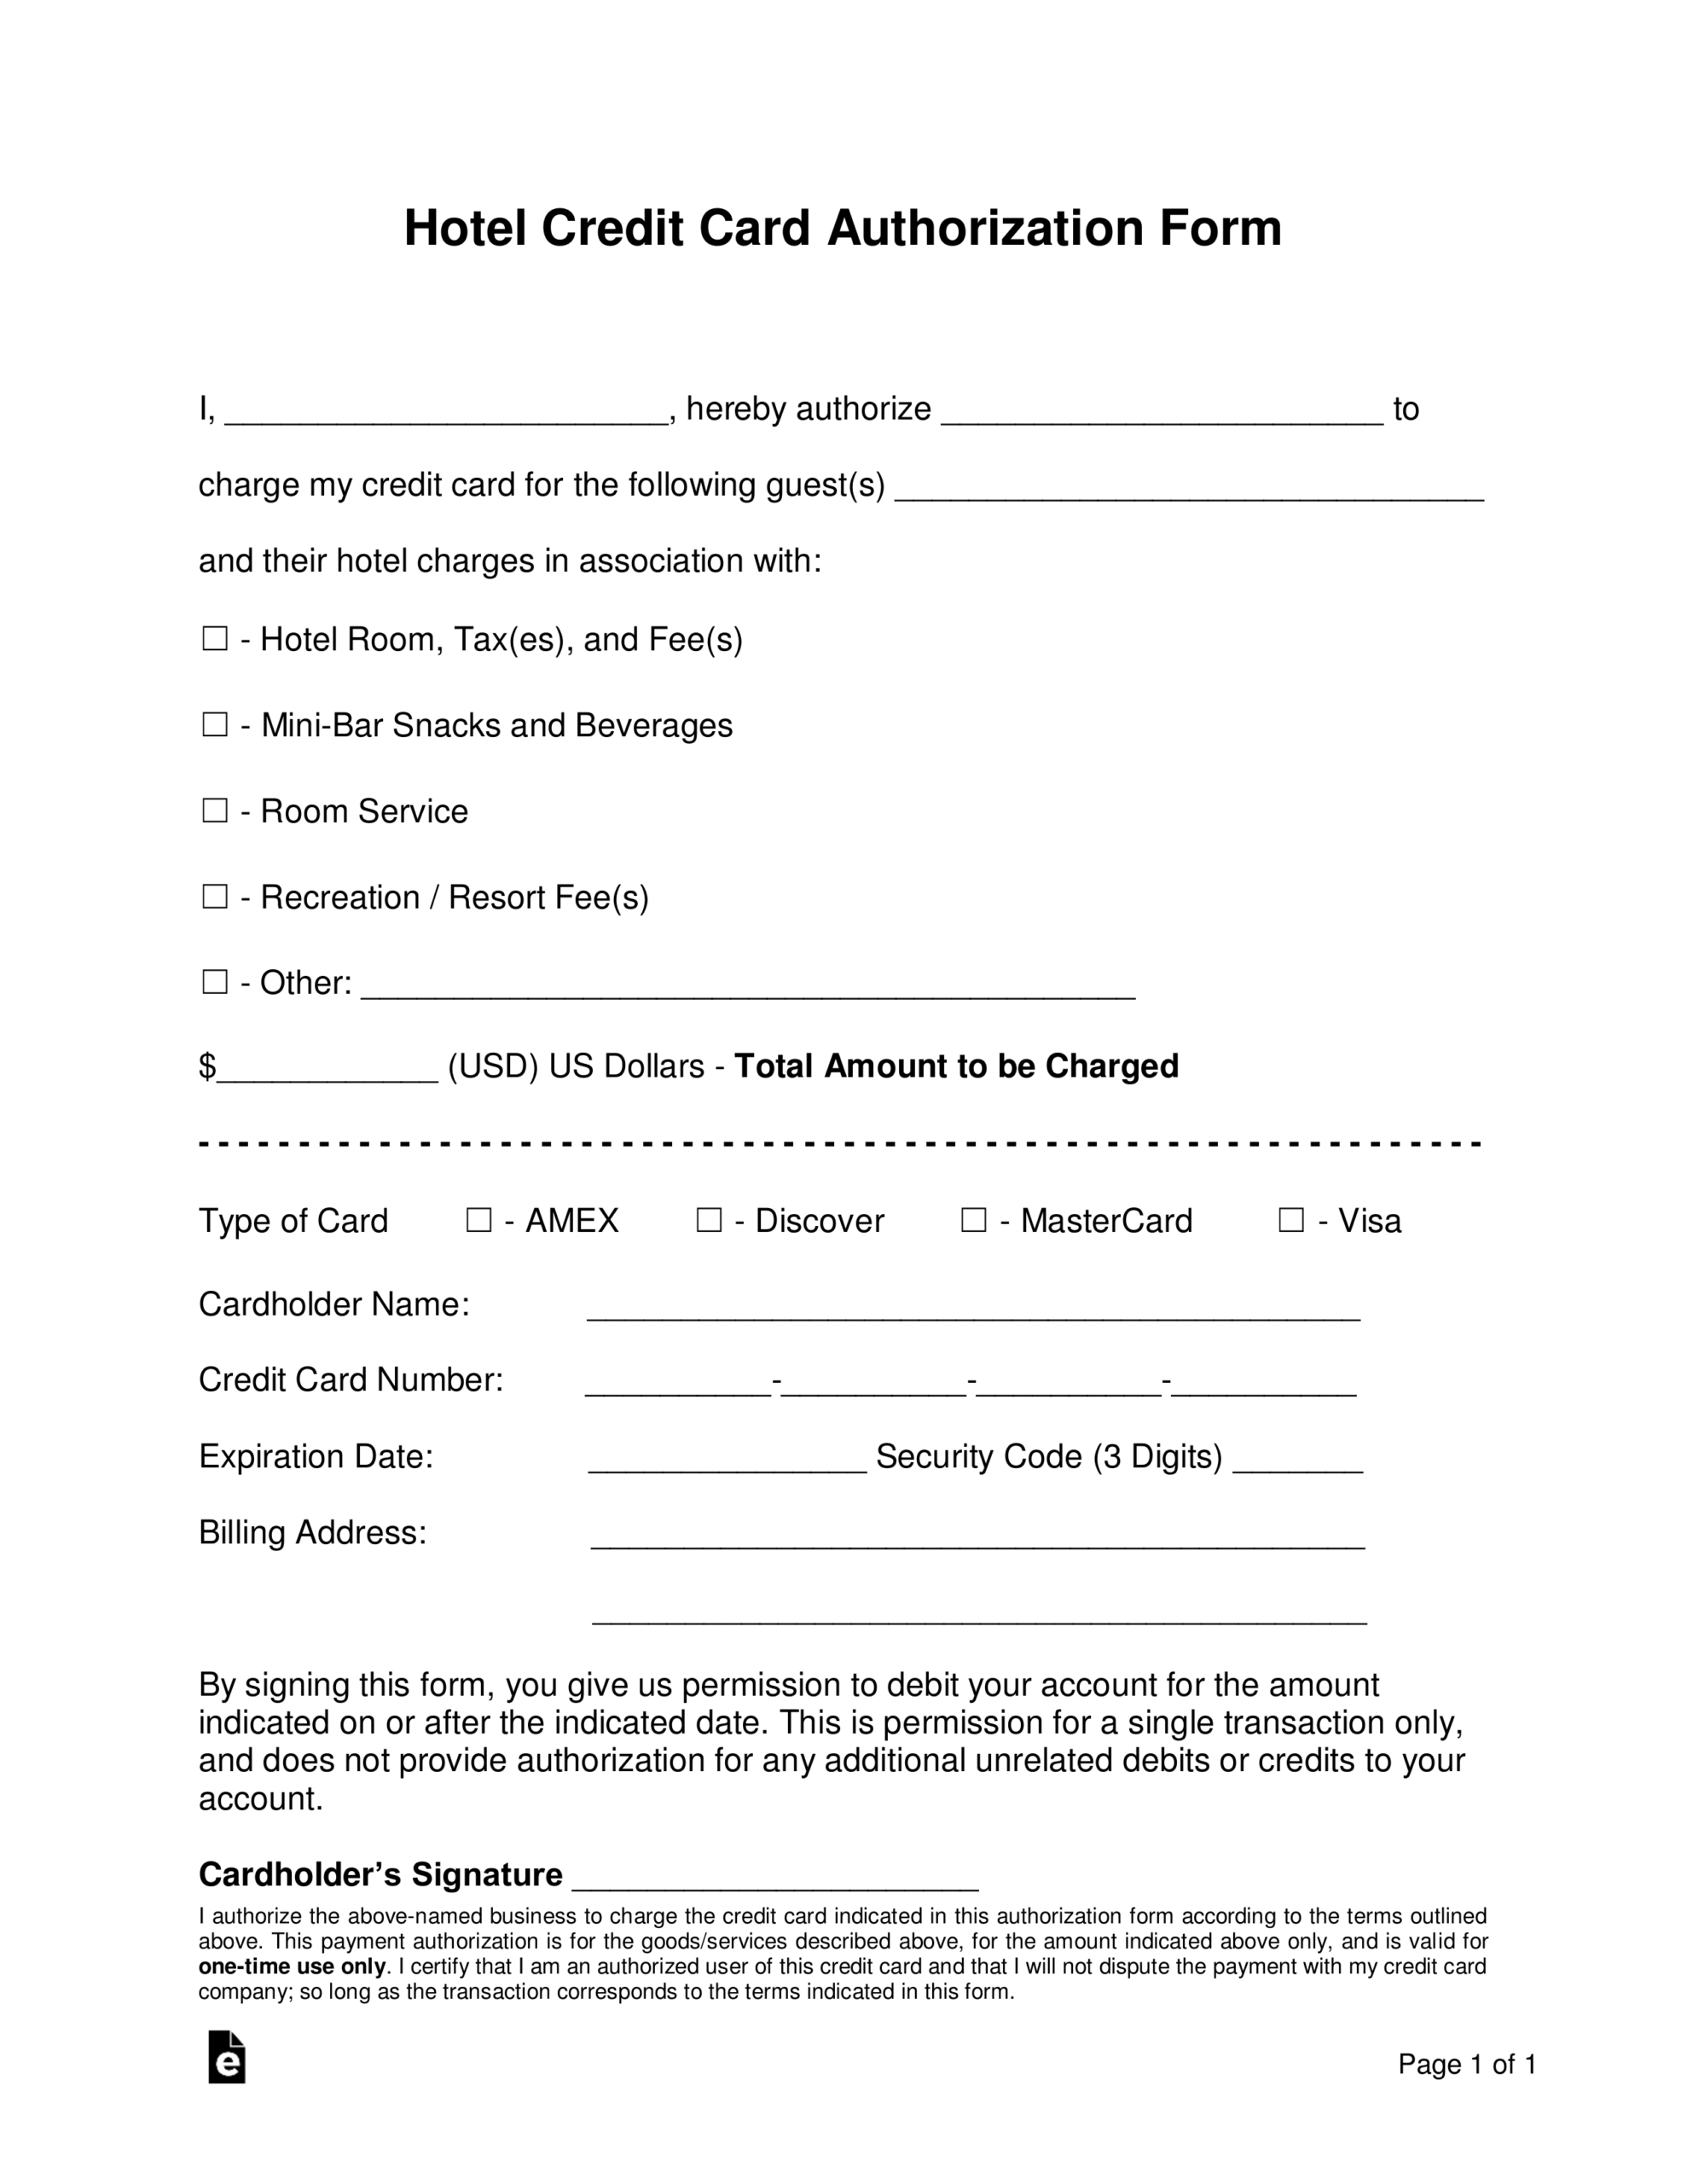 Free Hotel Credit Card Authorization Forms - Word | Pdf Intended For Hotel Credit Card Authorization Form Template